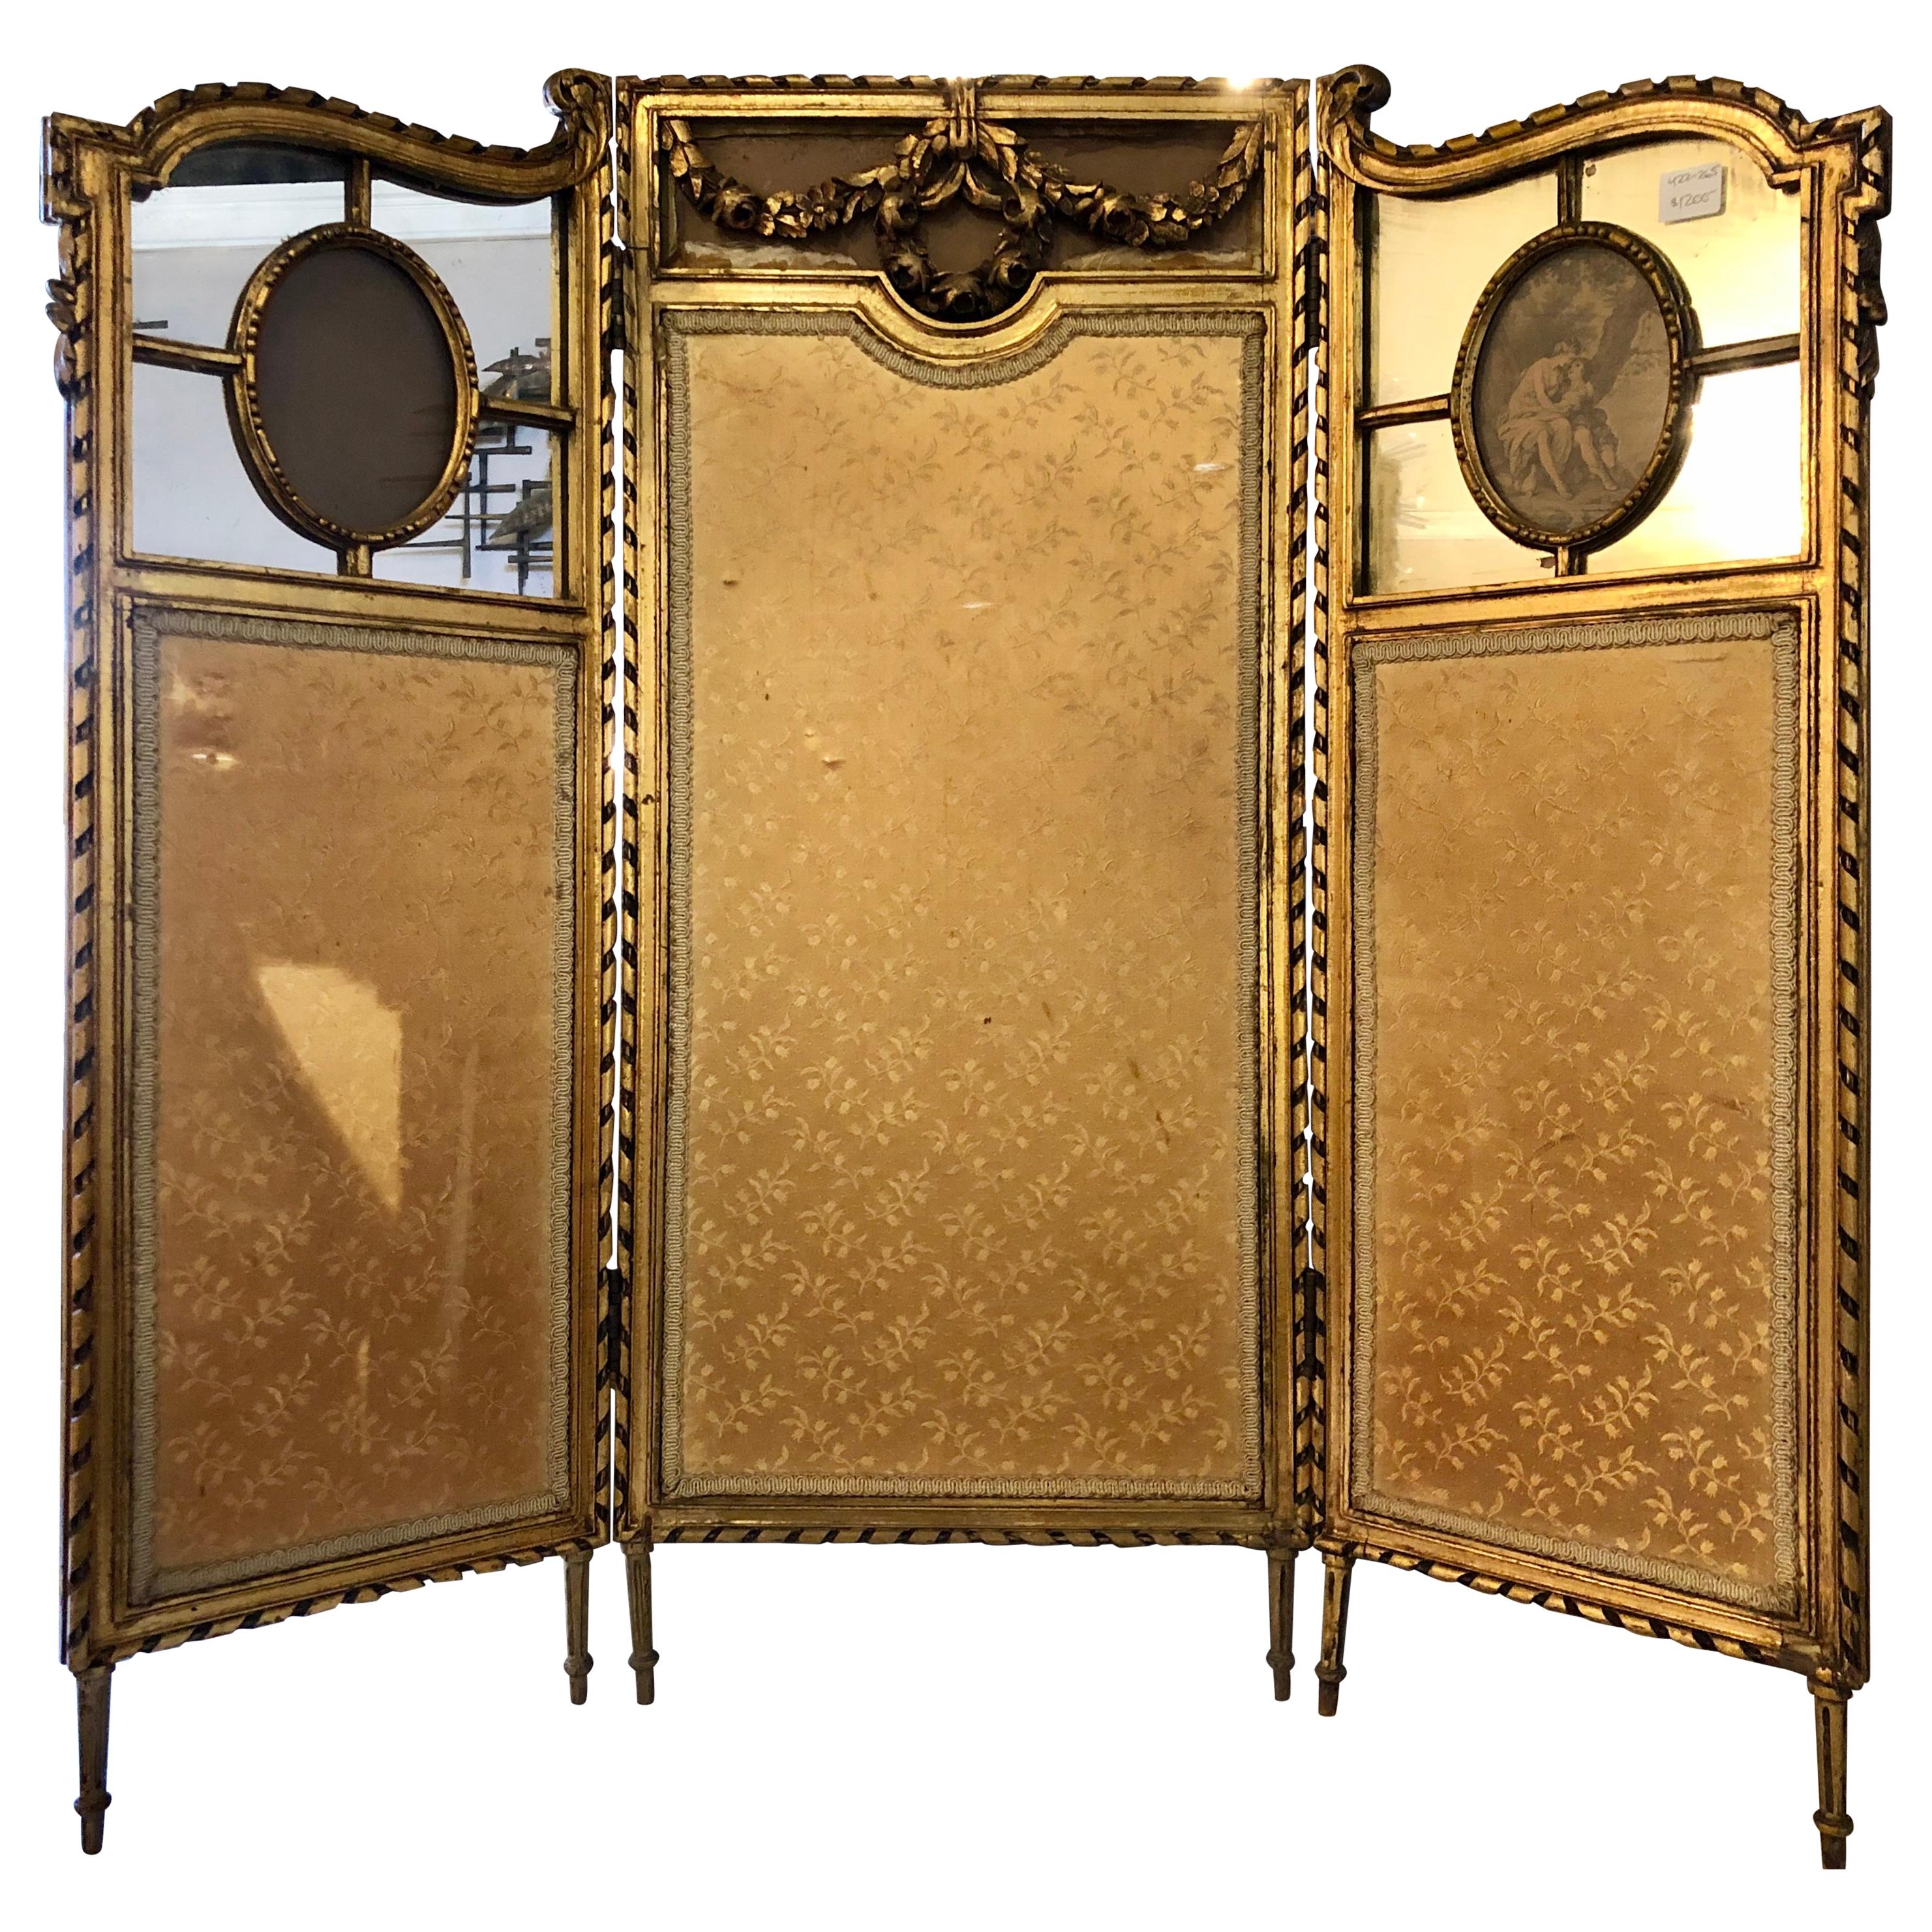 19th Century Louis XVI Style Fire / Dressing Screen or Room Divider